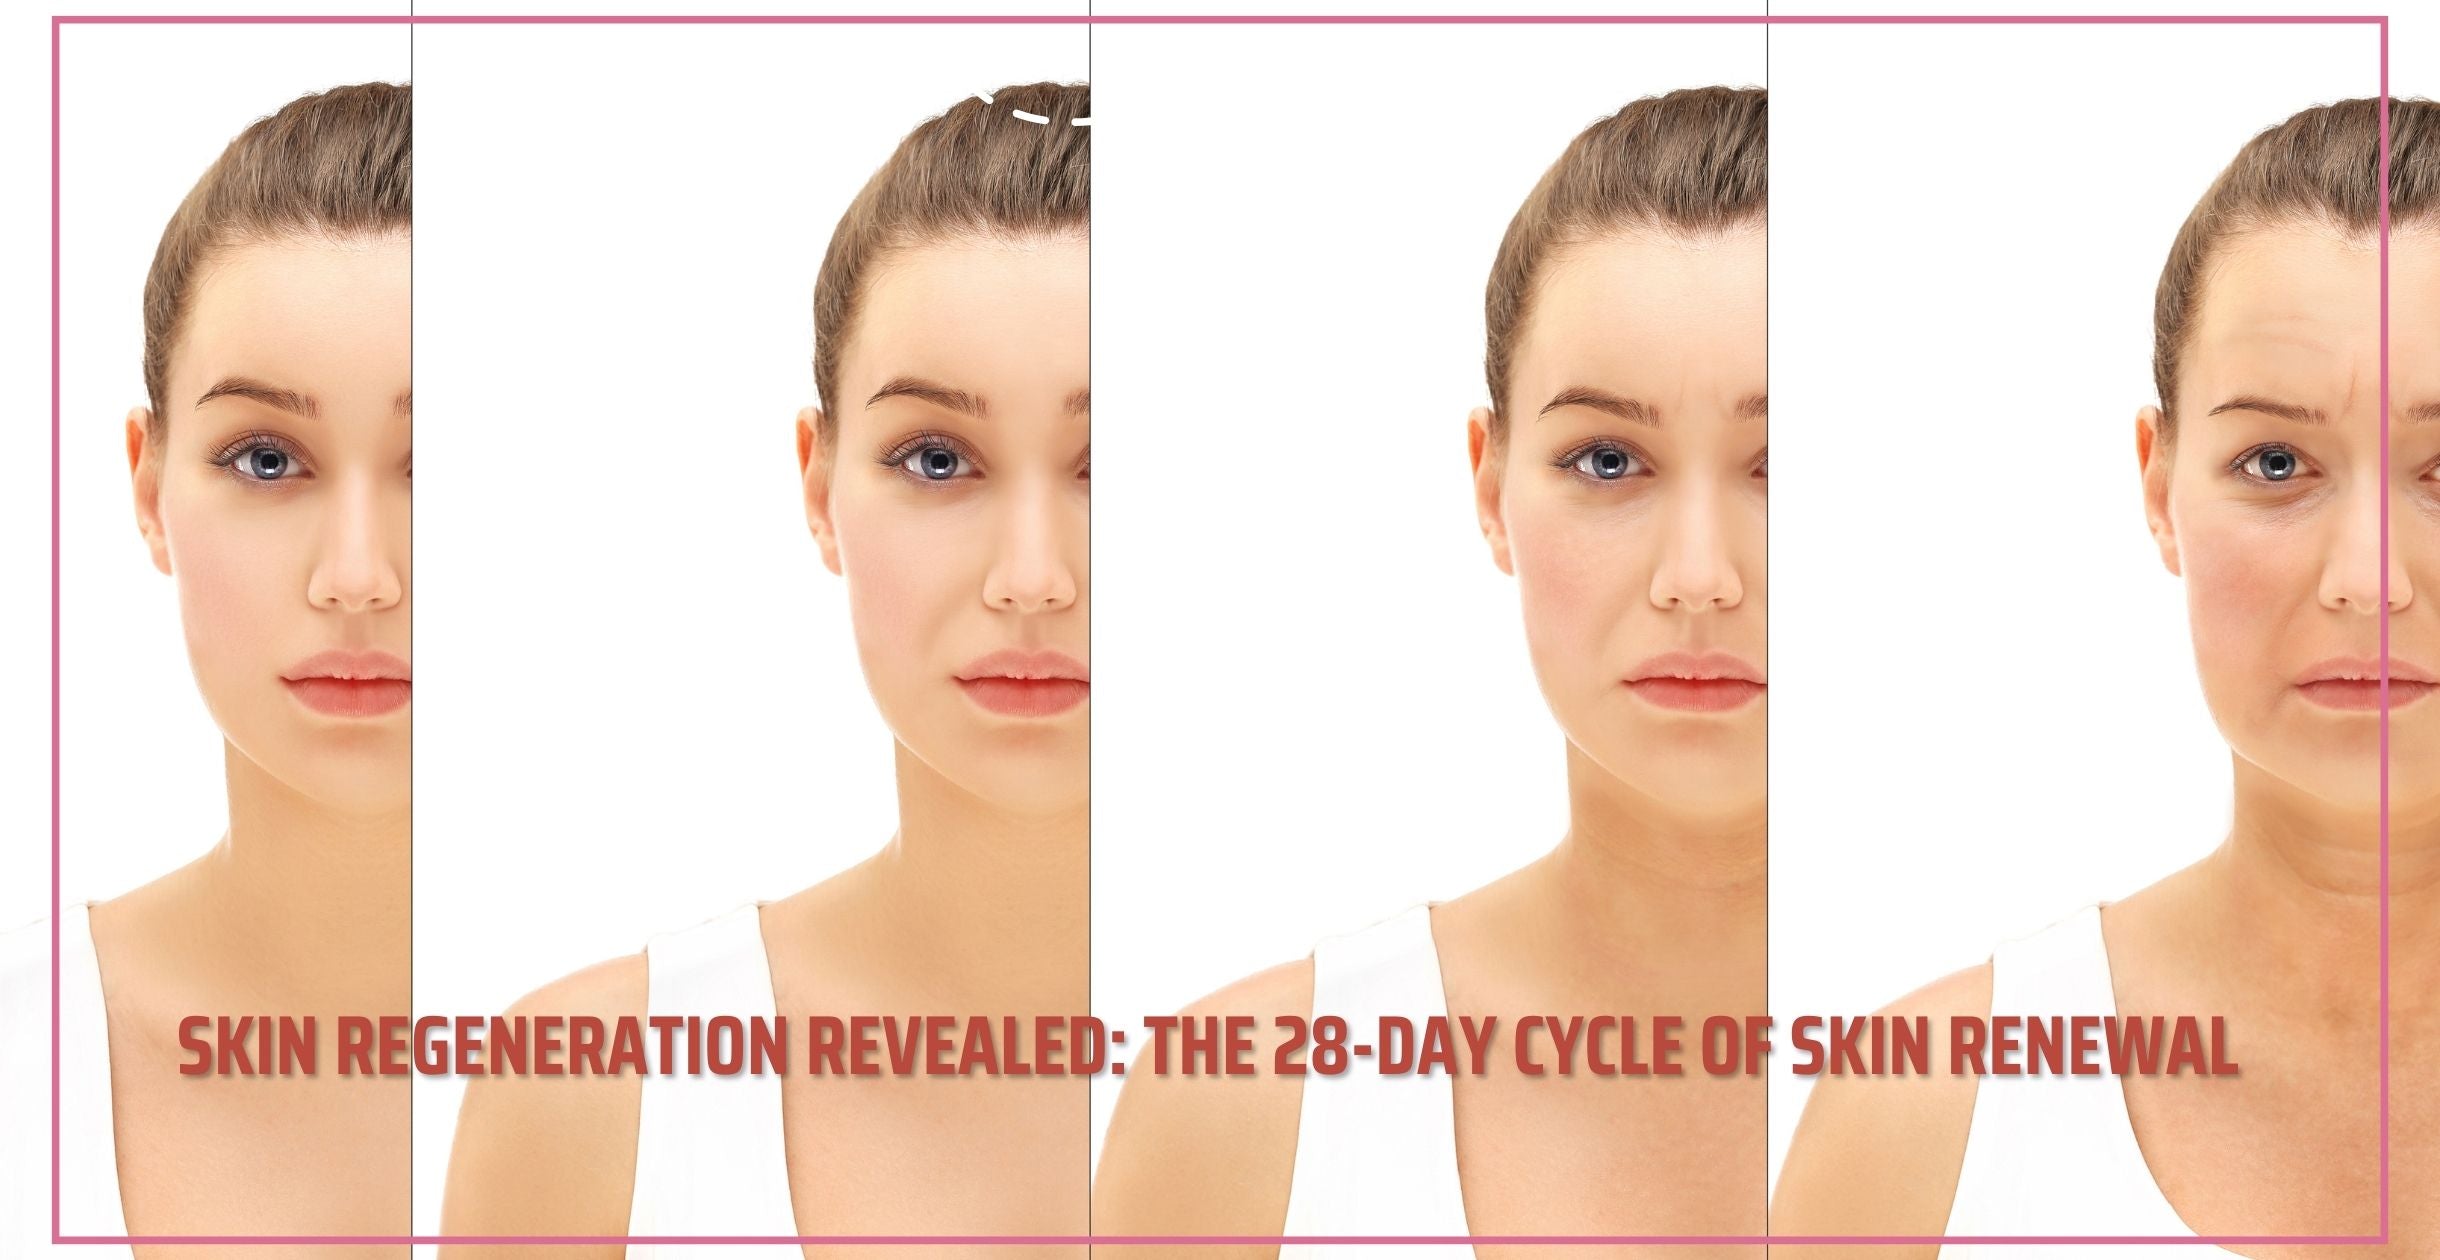 Skin Regeneration Revealed: The 28-Day Cycle of Skin Renewal